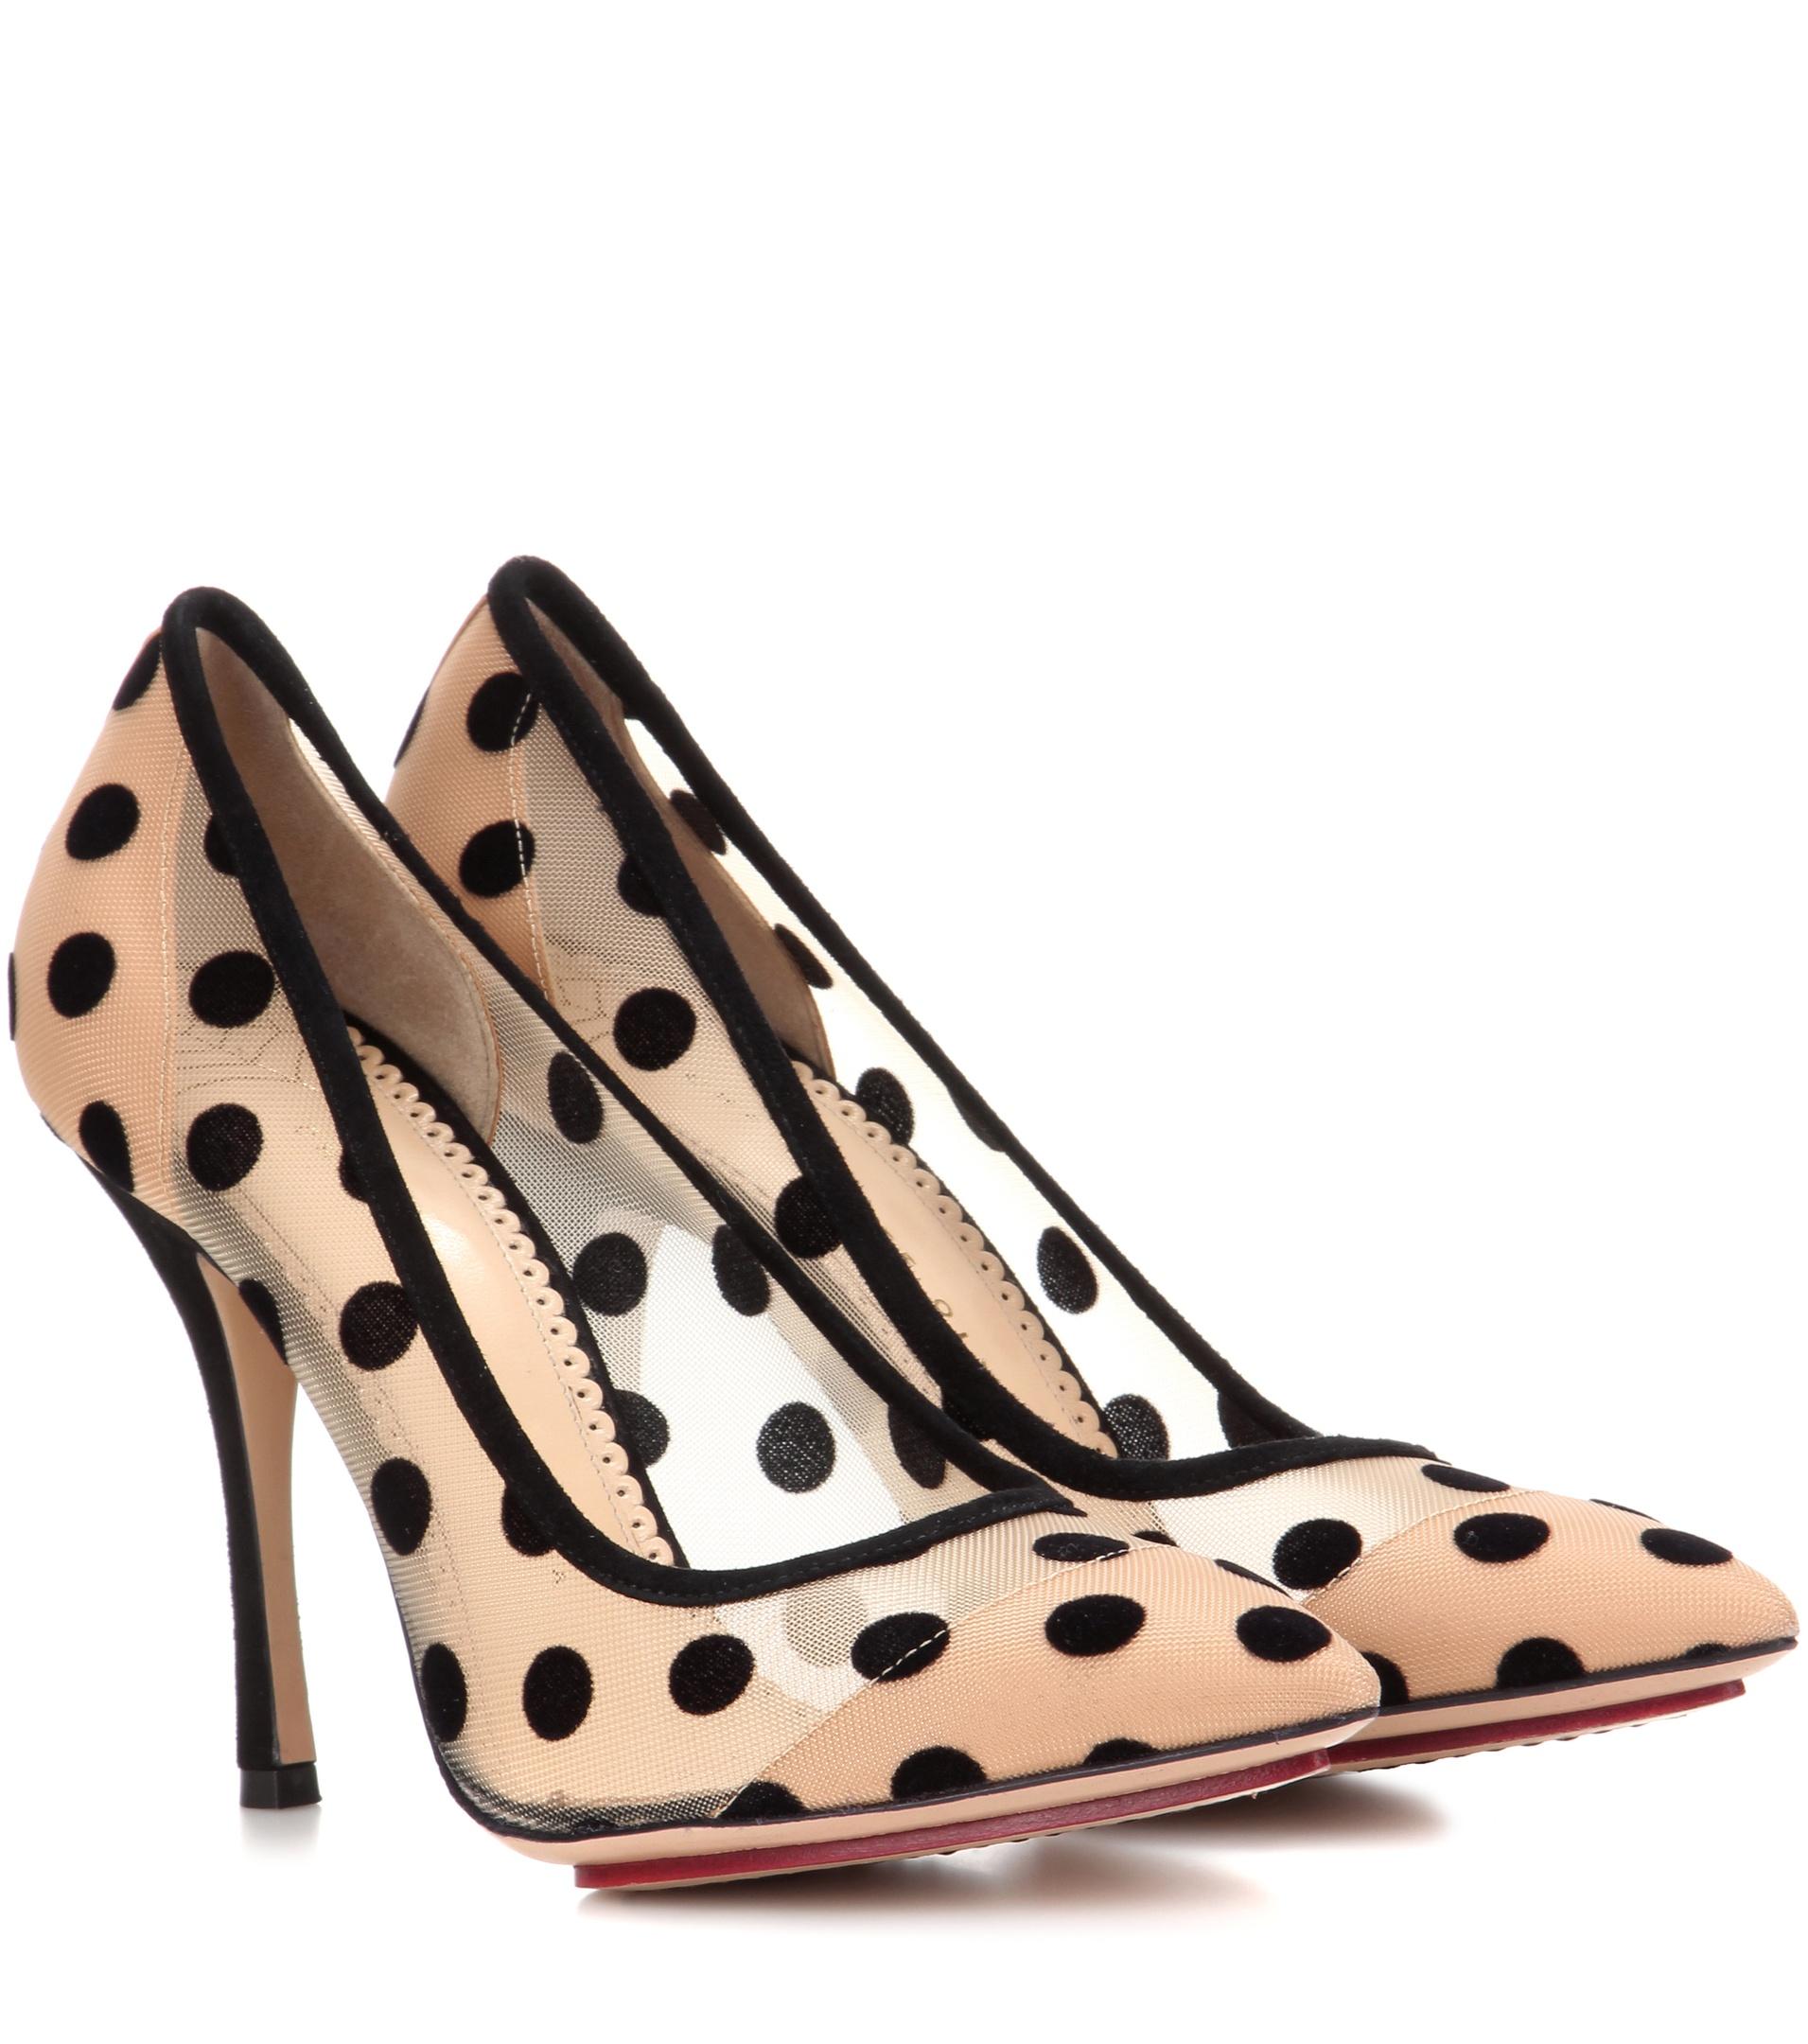 Lyst - Charlotte Olympia Polka-dot Pumps in Brown